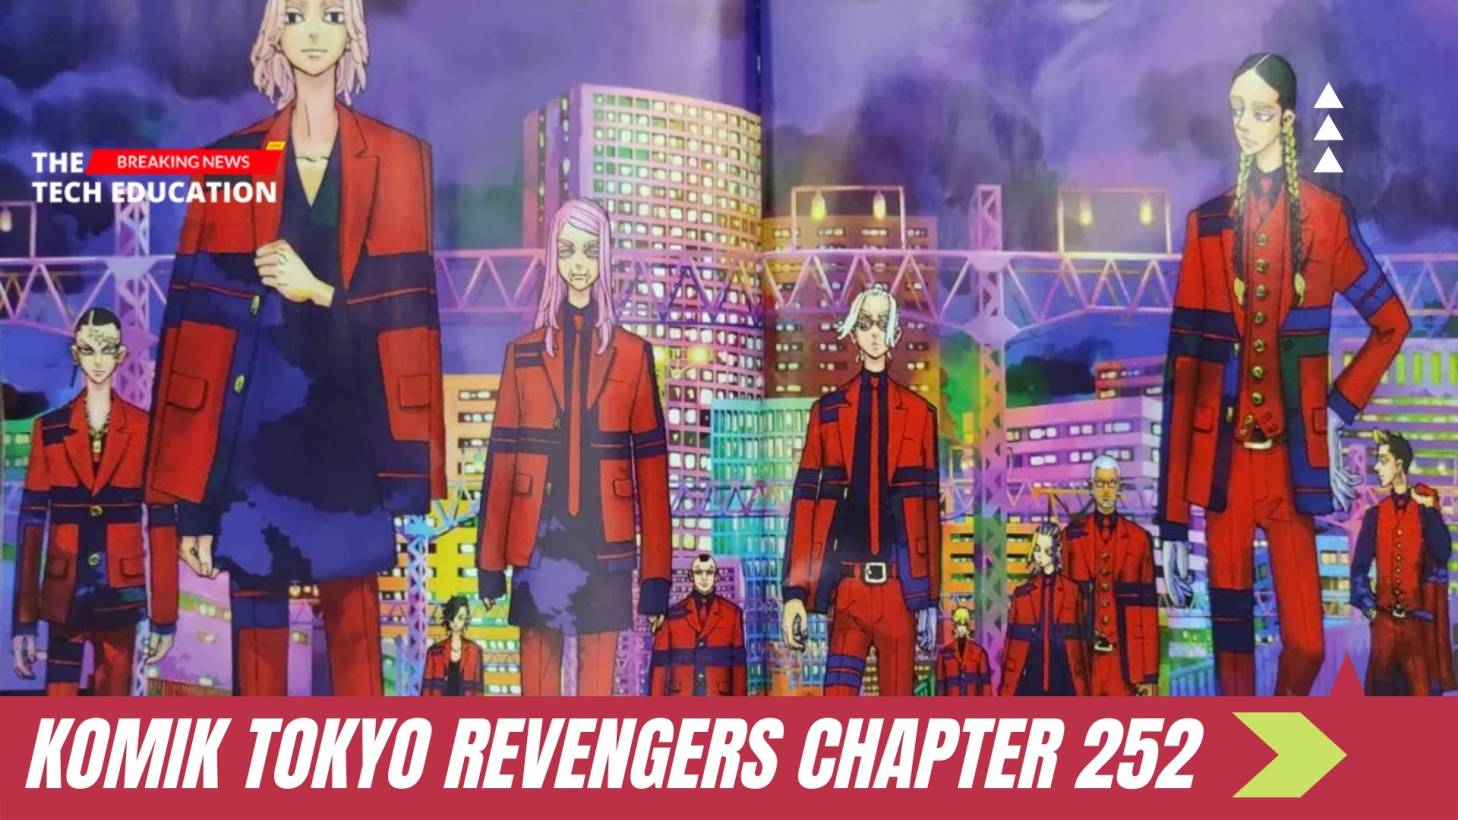 Tokyo Revengers Chapter 252 Delayed, New Release Date